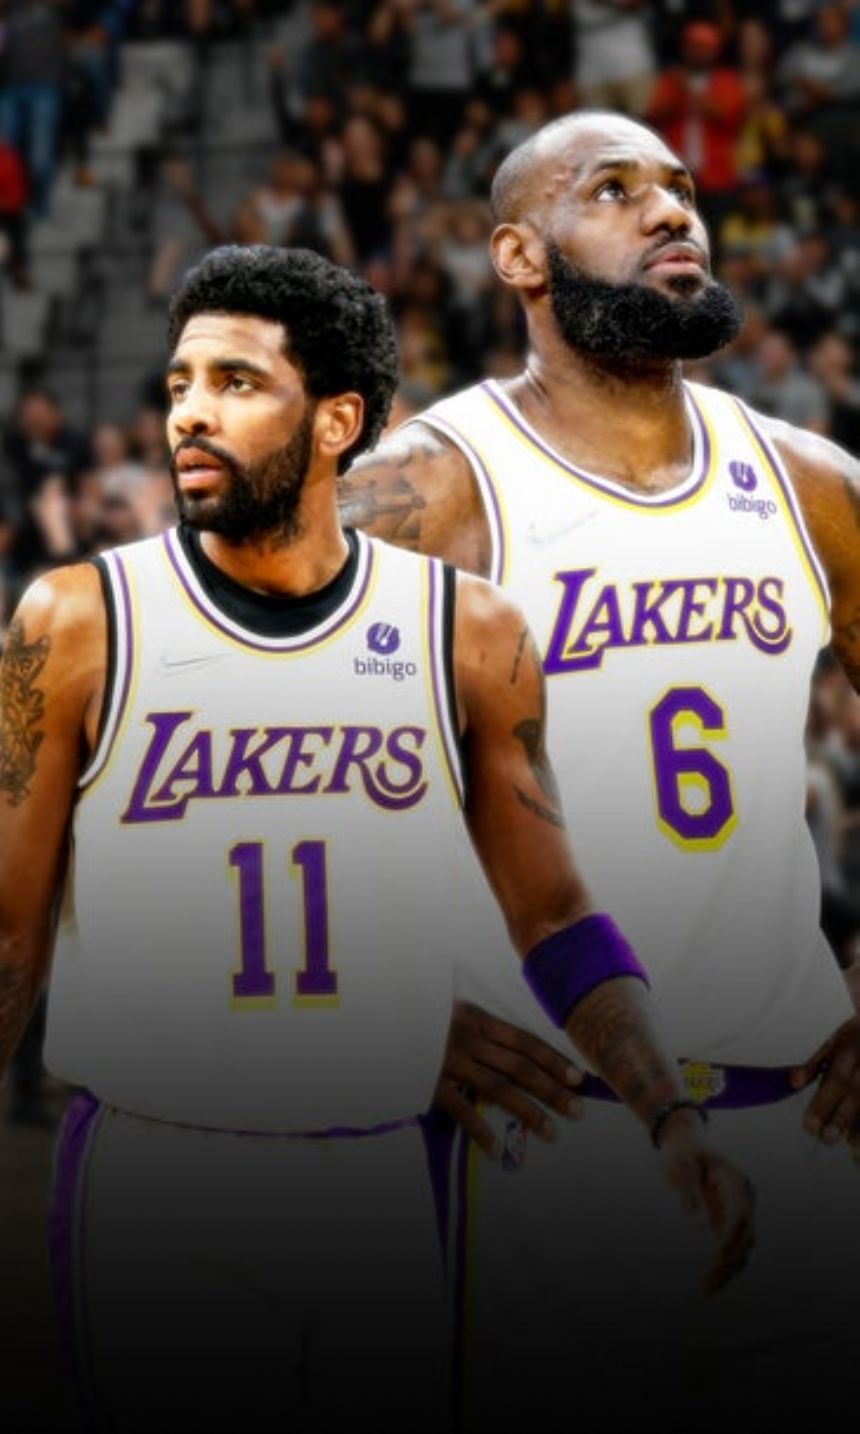 Will Kyrie Irving opt-out of Nets deal to join LeBron, Lakers?